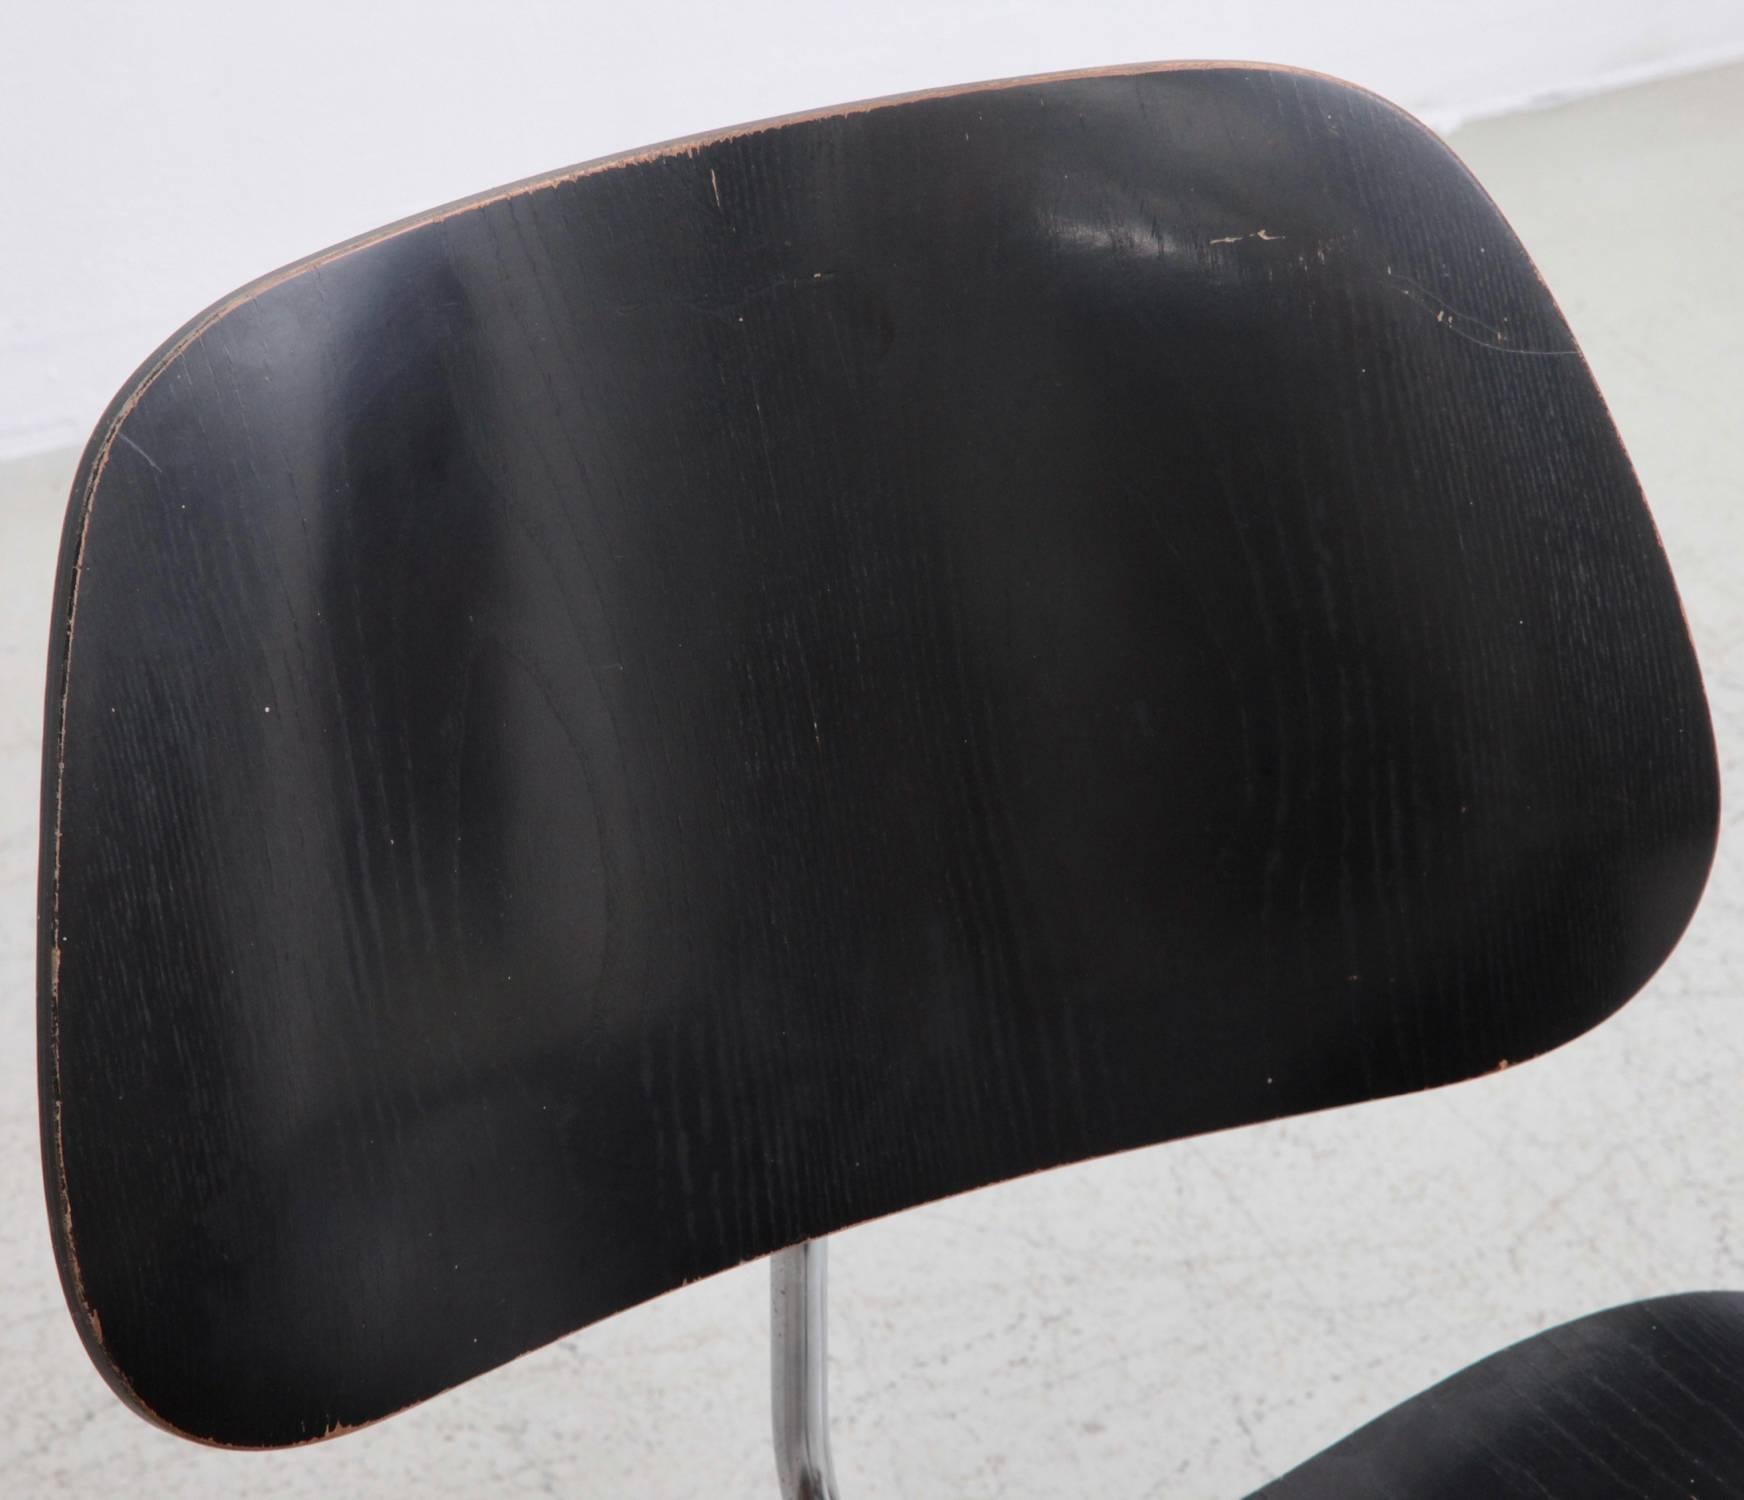 Mid-20th Century Pair of Early LCM Lounge Chairs by Charles Eames for Herman Miller